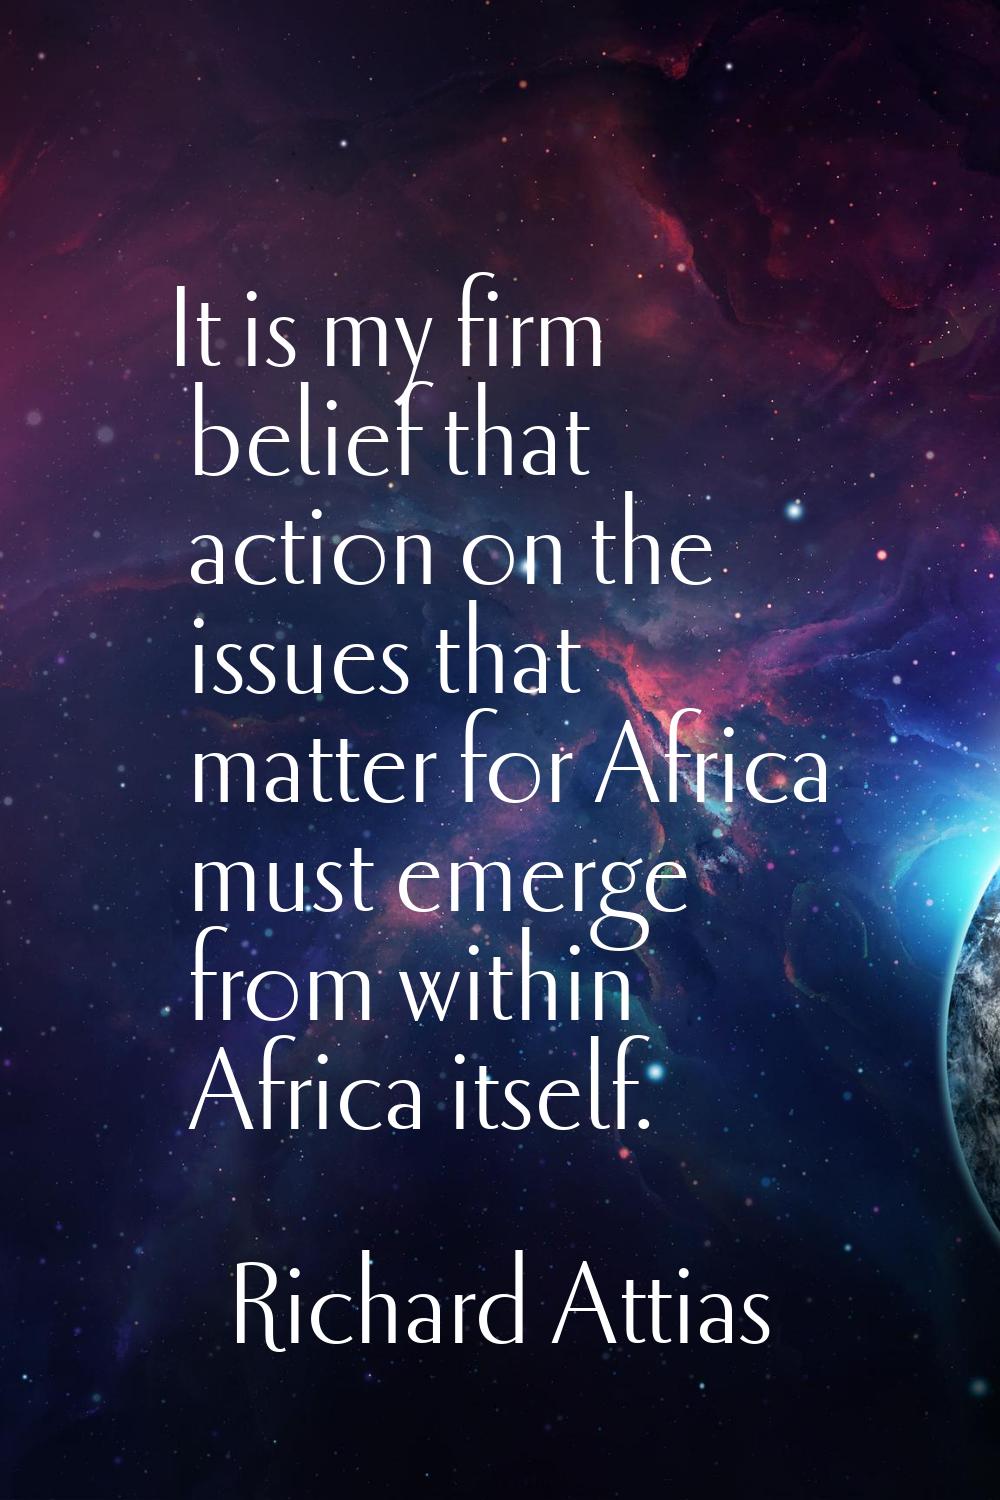 It is my firm belief that action on the issues that matter for Africa must emerge from within Afric